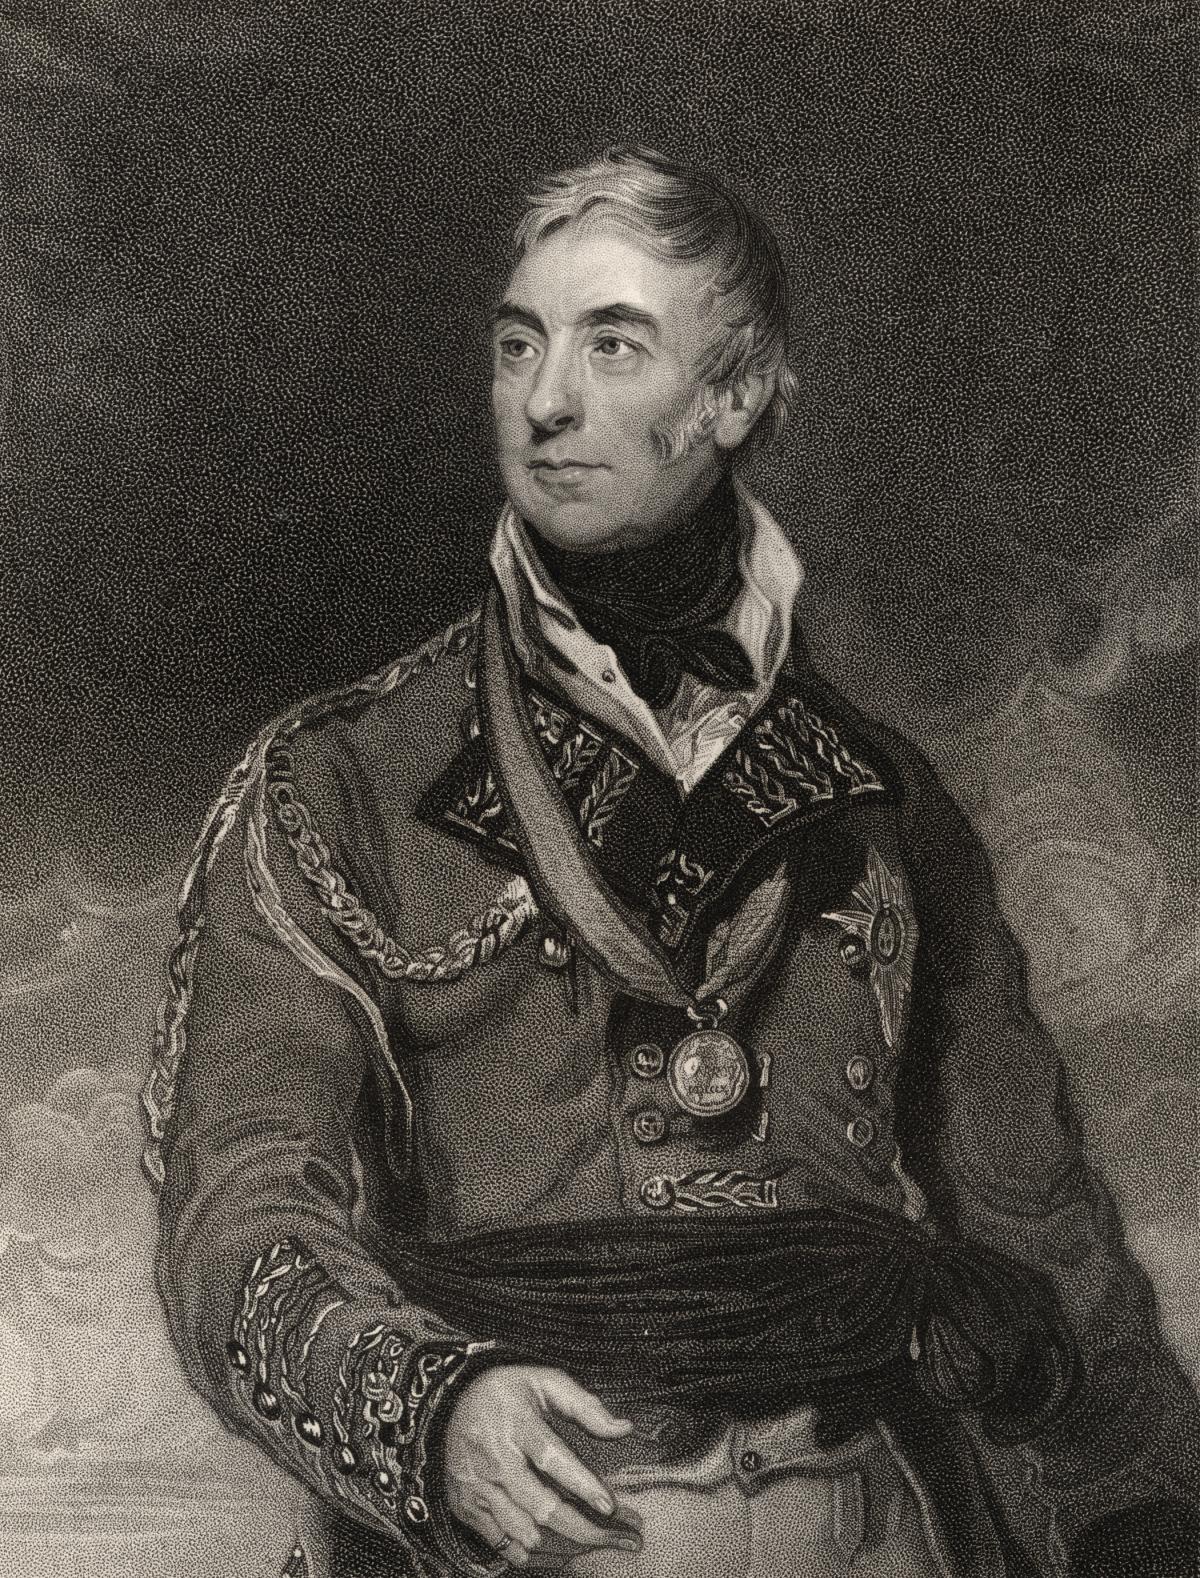 Black and white engraving of the general, wearing a military coat and a medal around his neck, looking off to his right